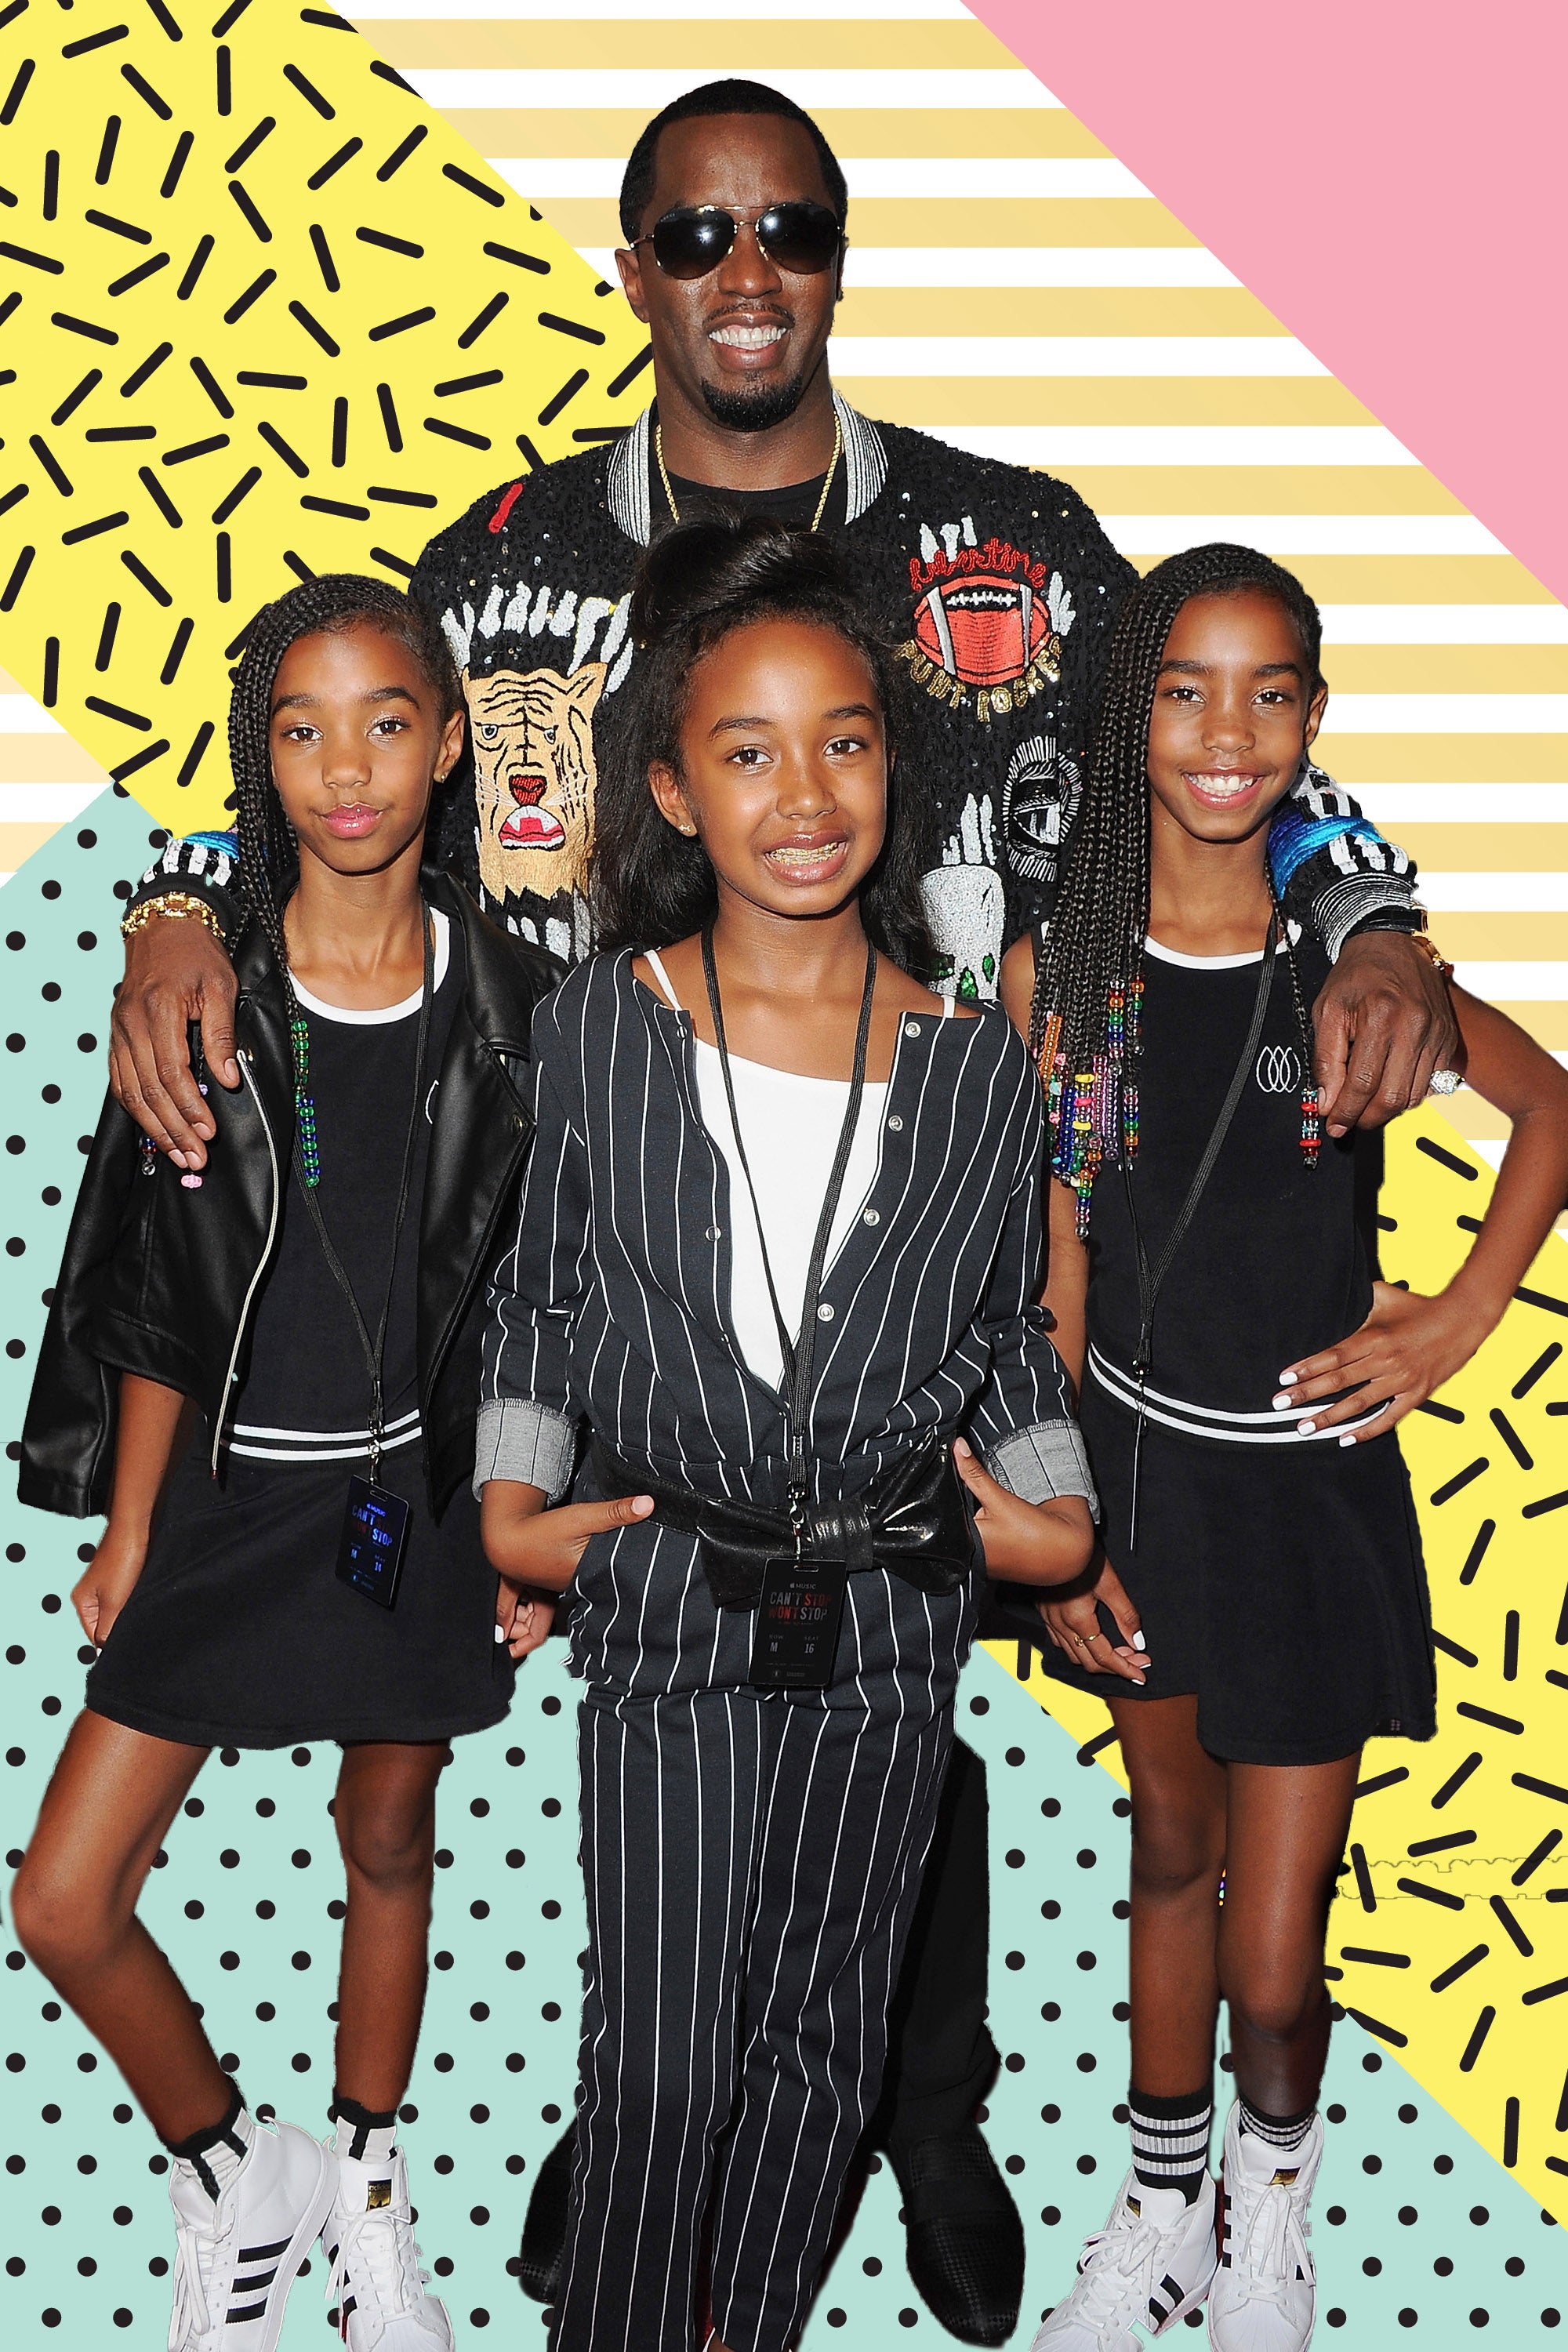 Diddy Is The Personal Hype Man To His Daughters In This Adorable Video
